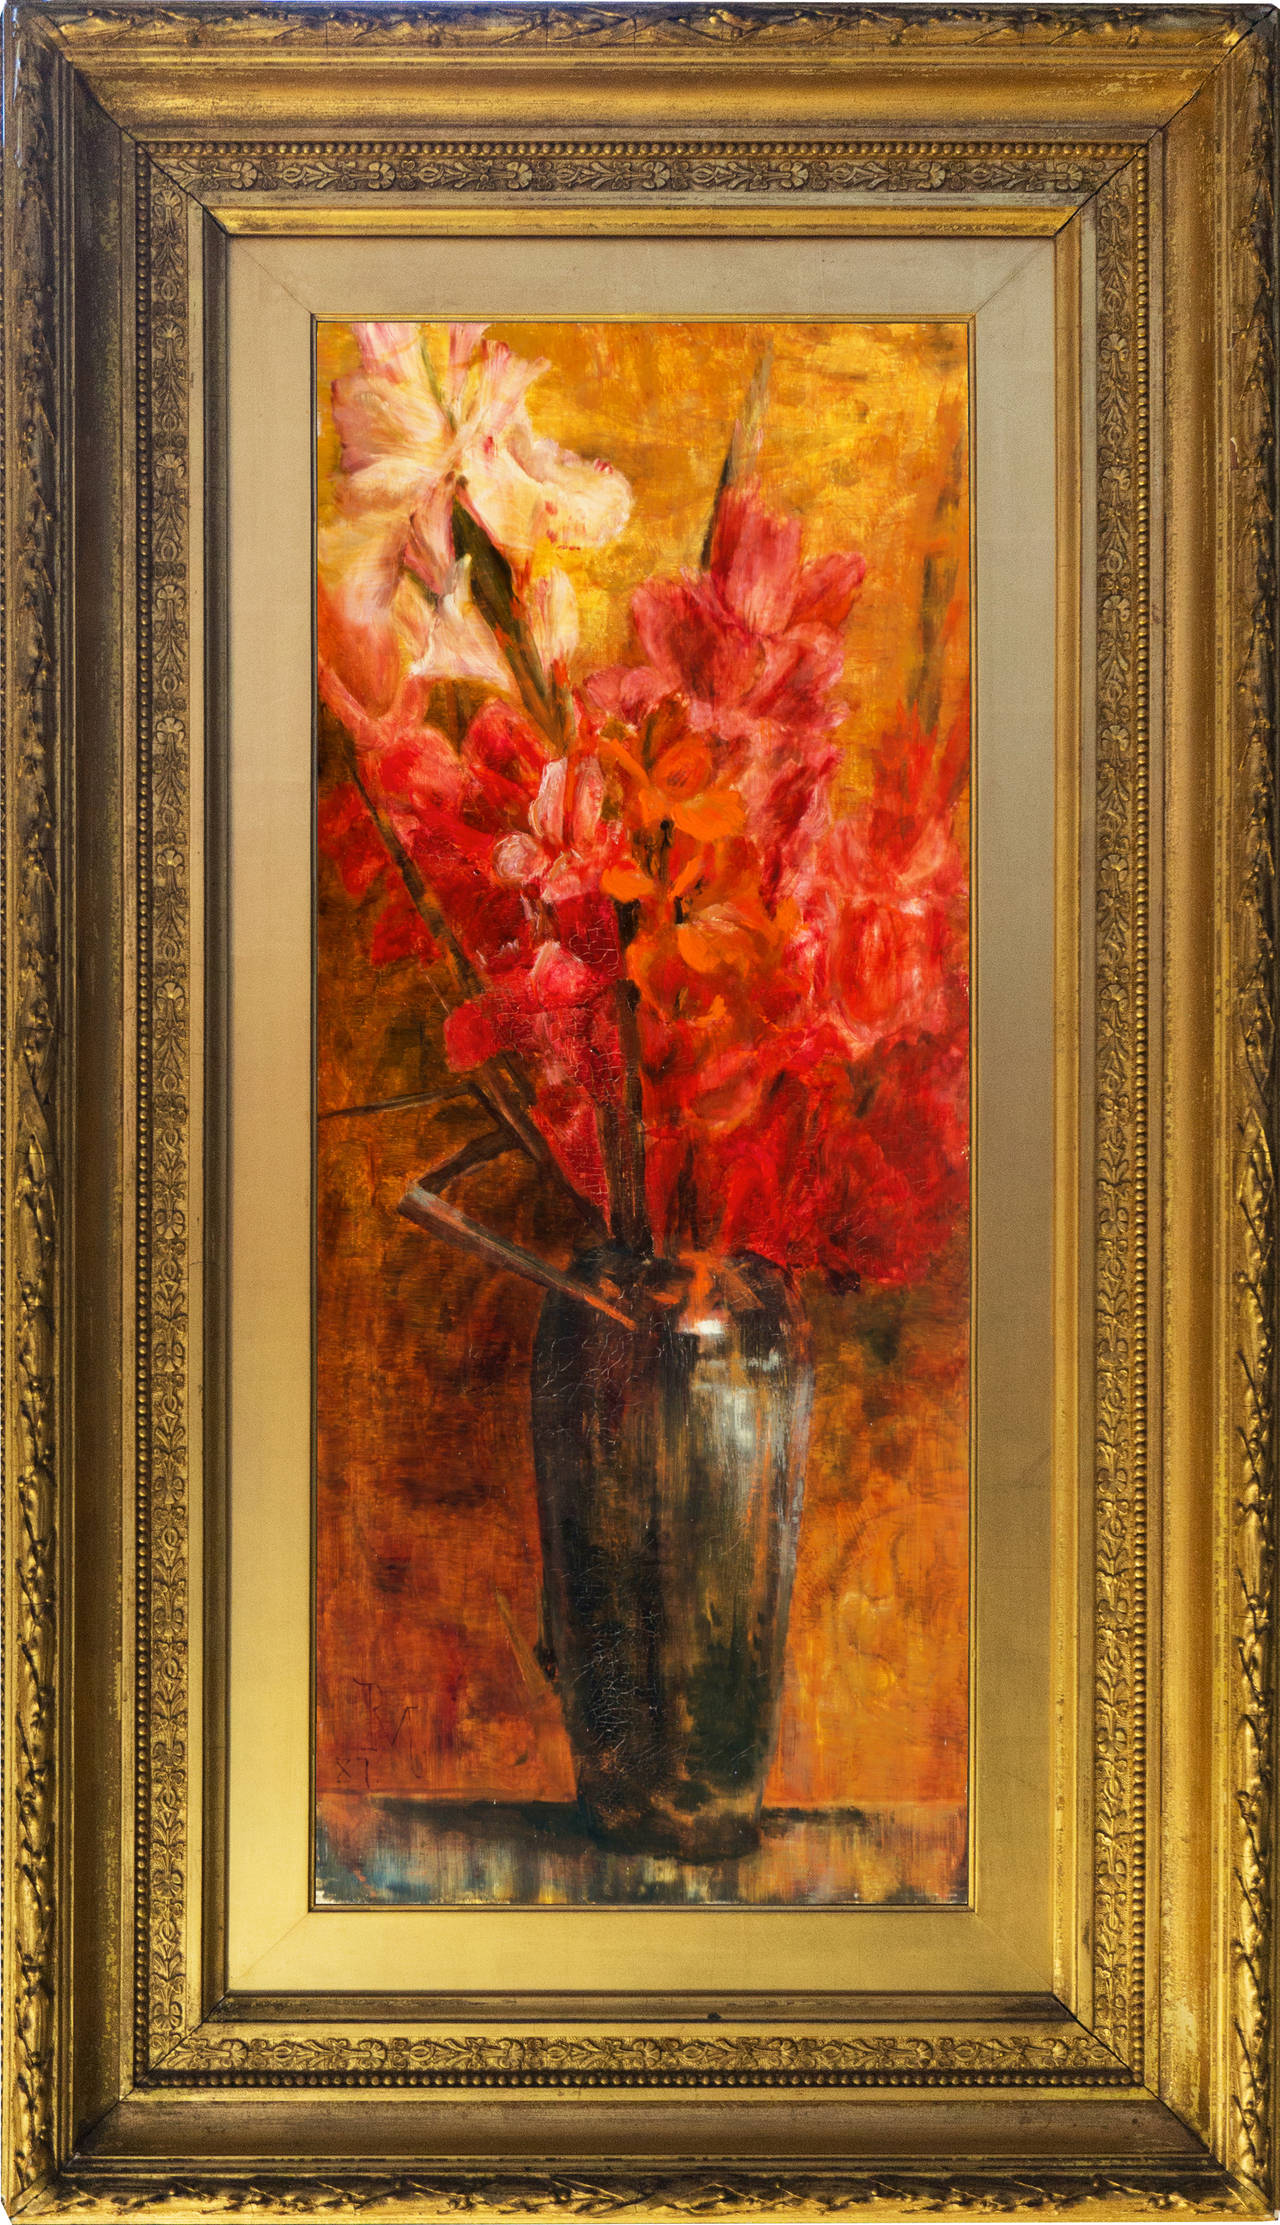 'Red Gladioli in a Chinese Vase', Aesthetic Movement Still Life, Woman Artist